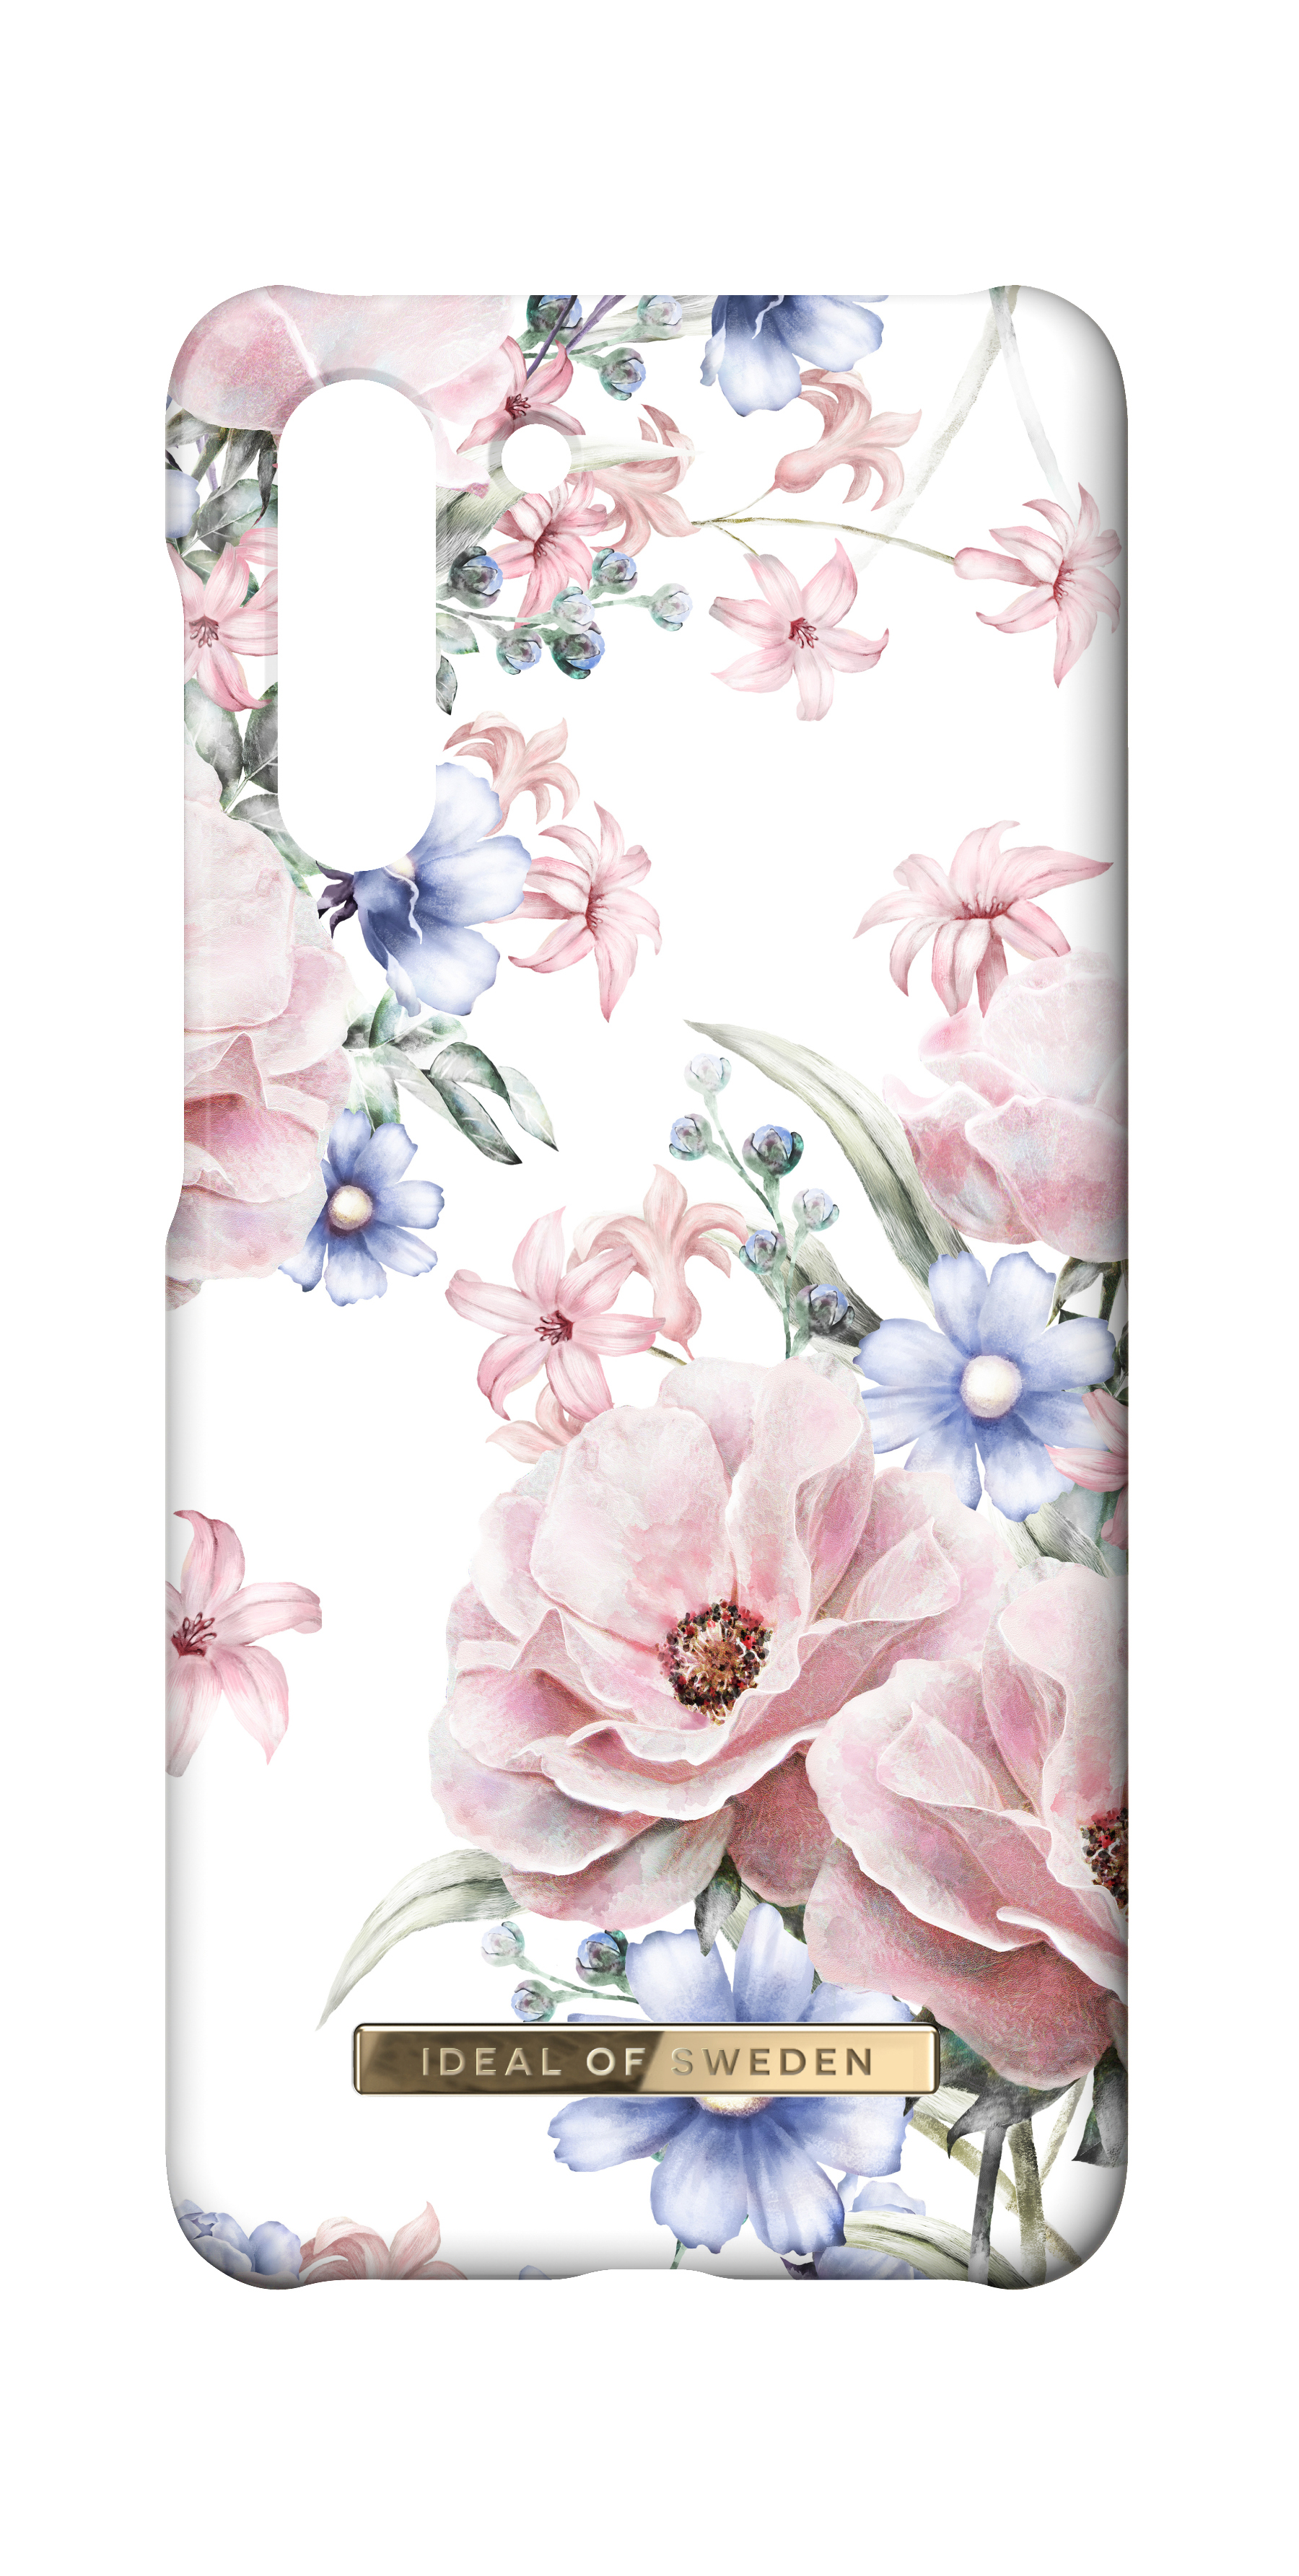 IDEAL OF Backcover, Case, Fashion SWEDEN Samsung, Galaxy S21, Weiß/Rosa